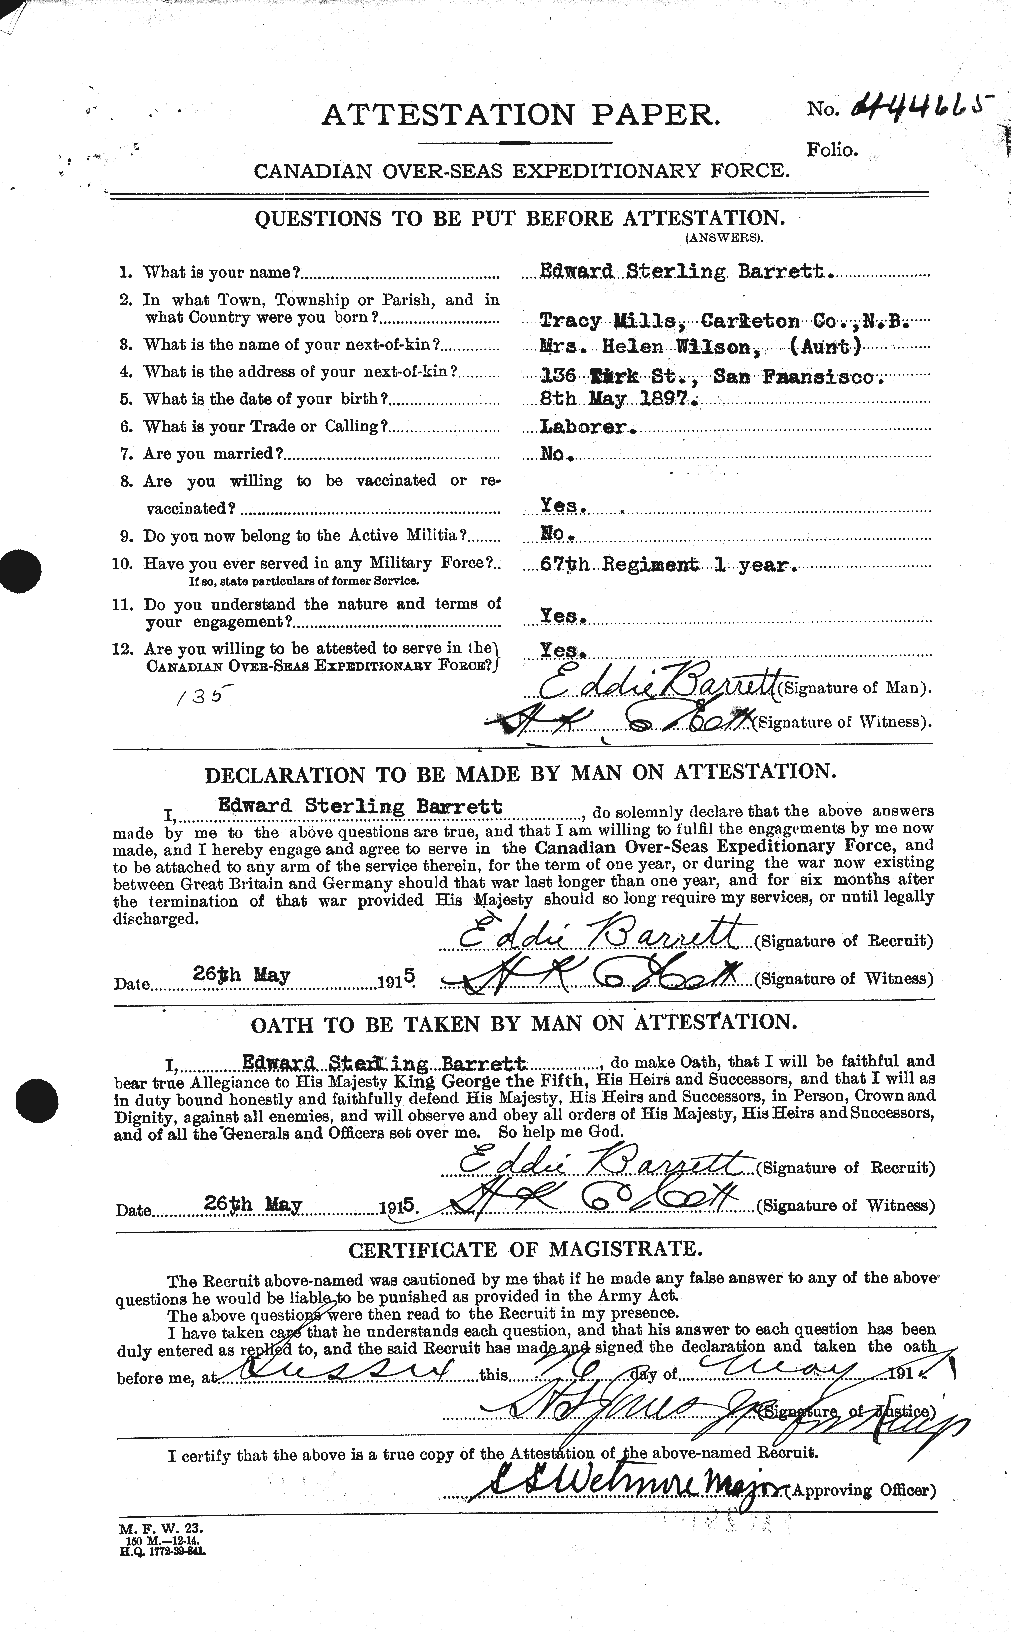 Personnel Records of the First World War - CEF 220357a